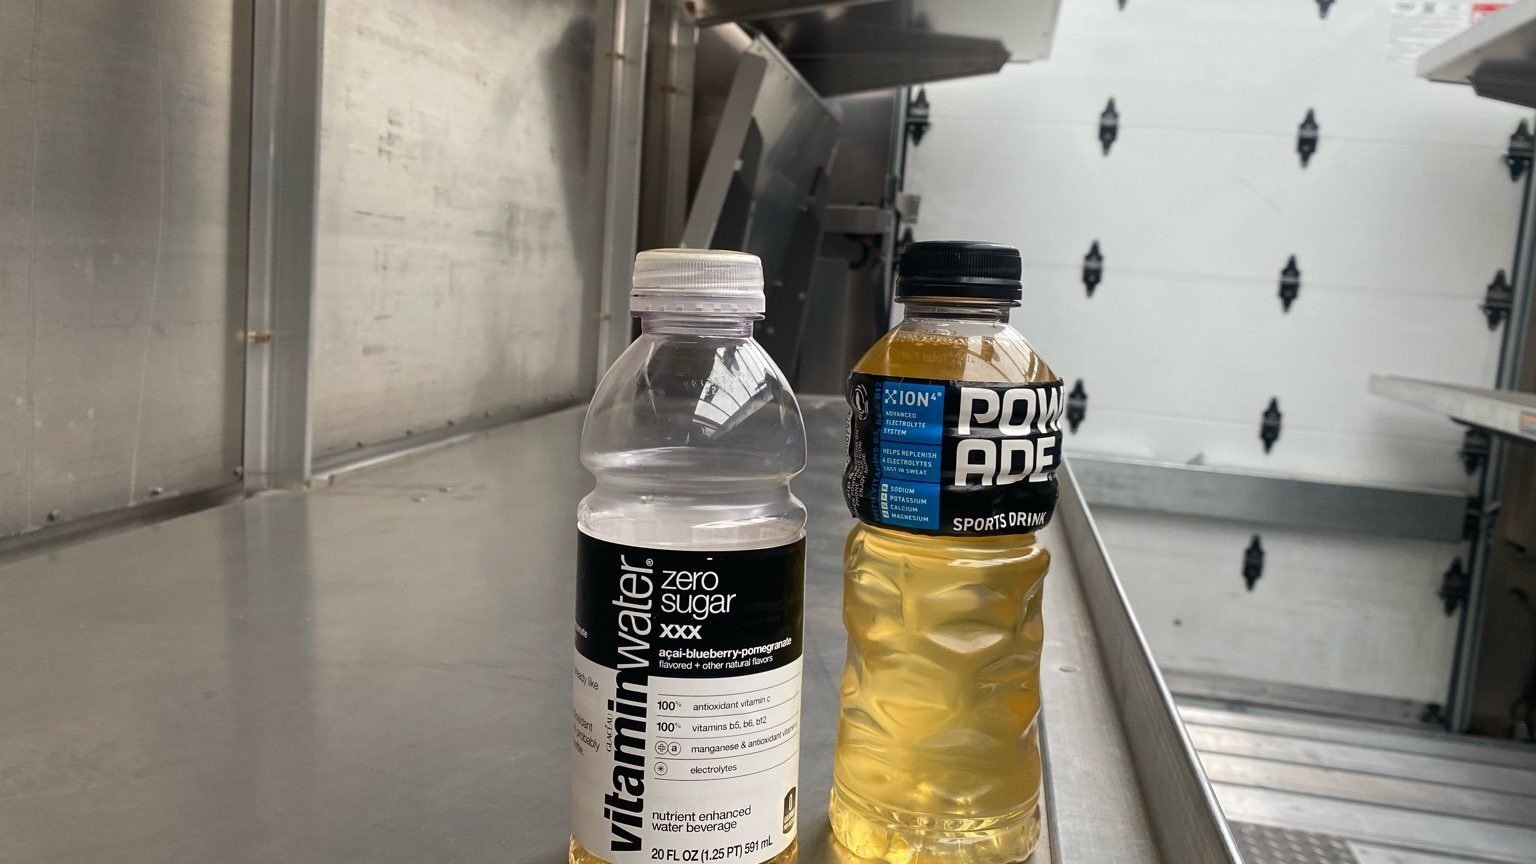 Amazon Denies Workers Pee in Bottles. Here Are the Pee Bottles.